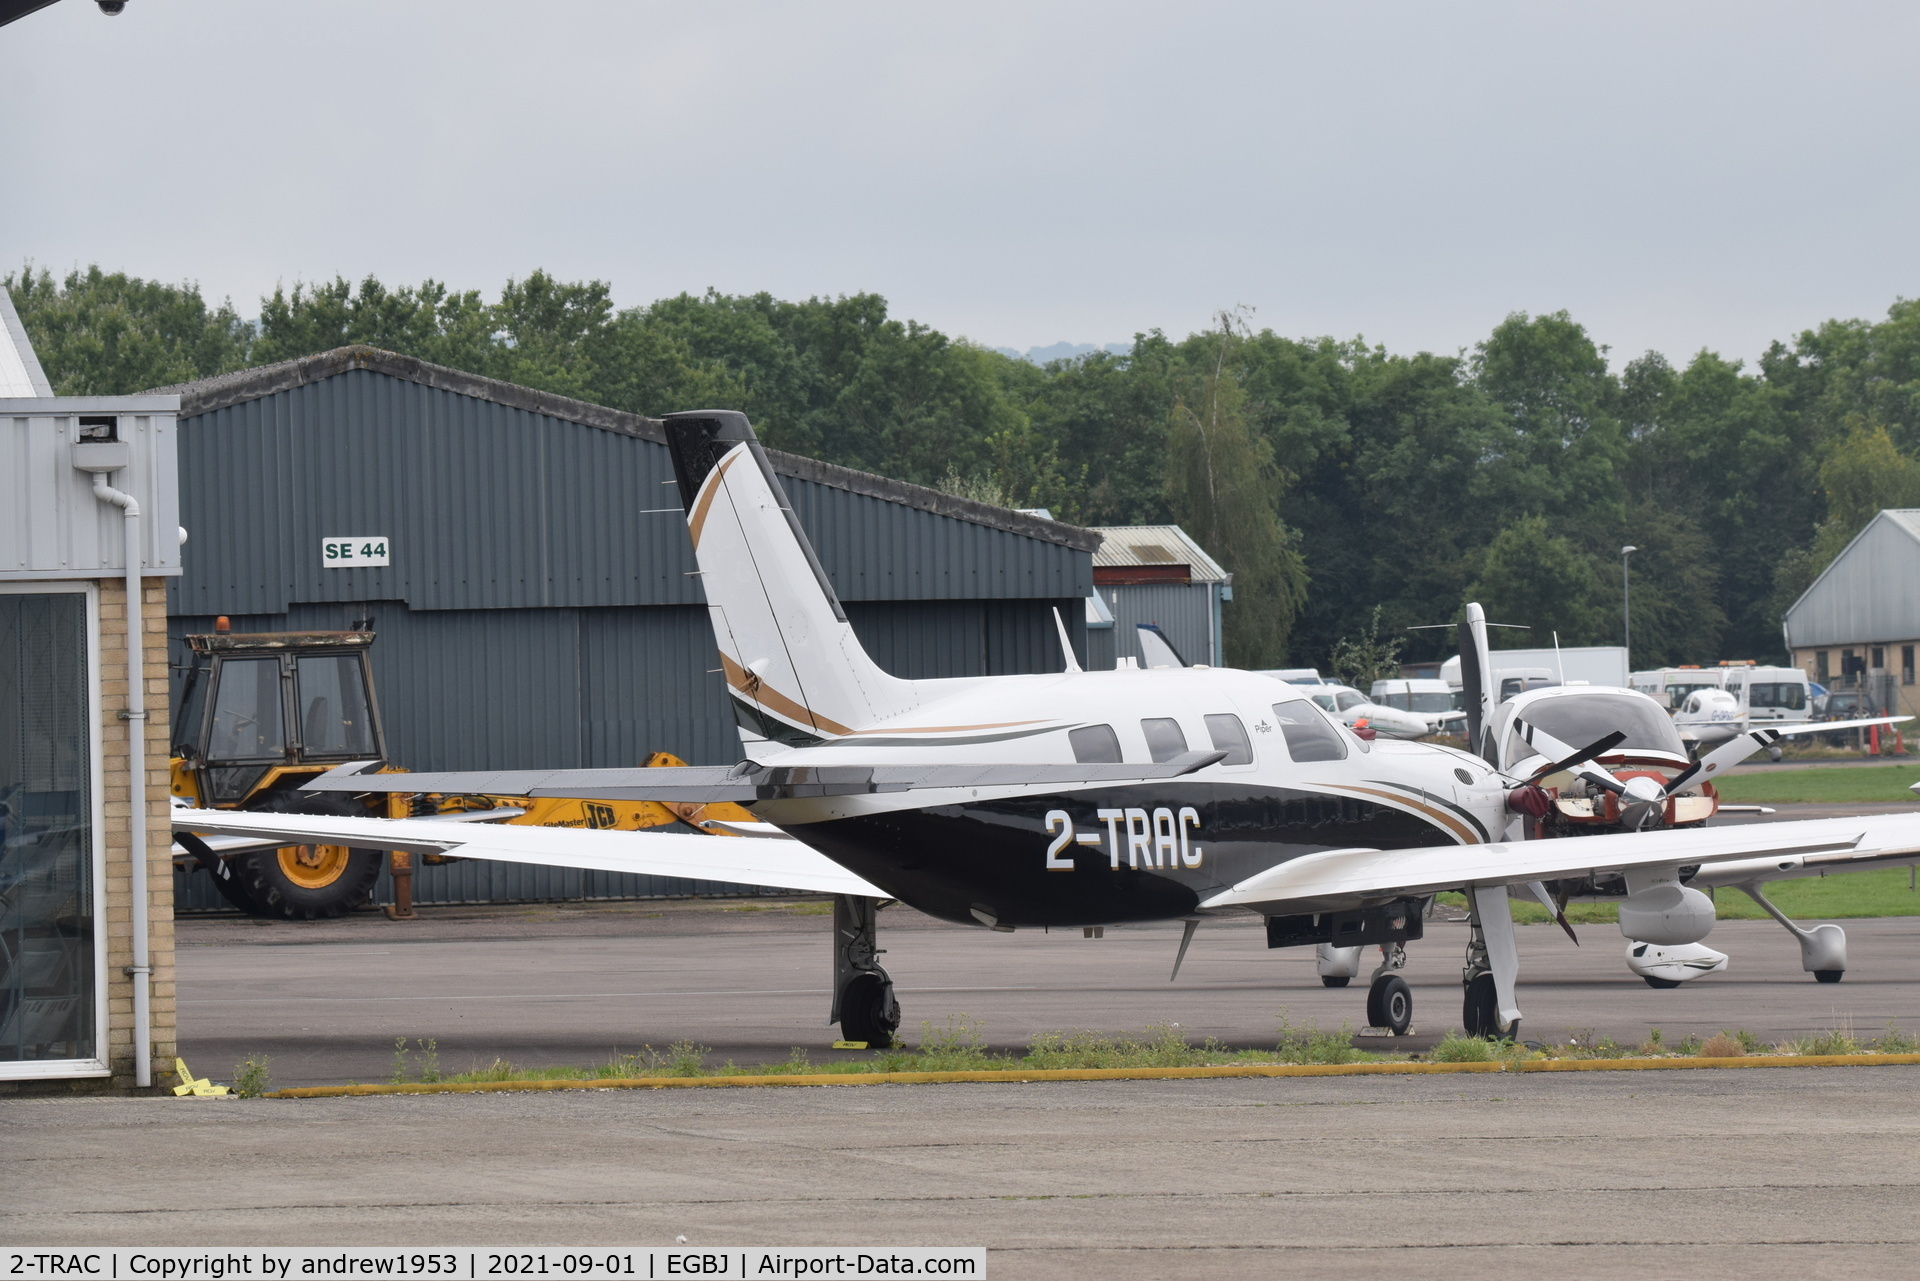 2-TRAC, 2014 Piper PA-46-500TP Meridian C/N 4697562, 2-TRAC at Gloucestershire Airport.